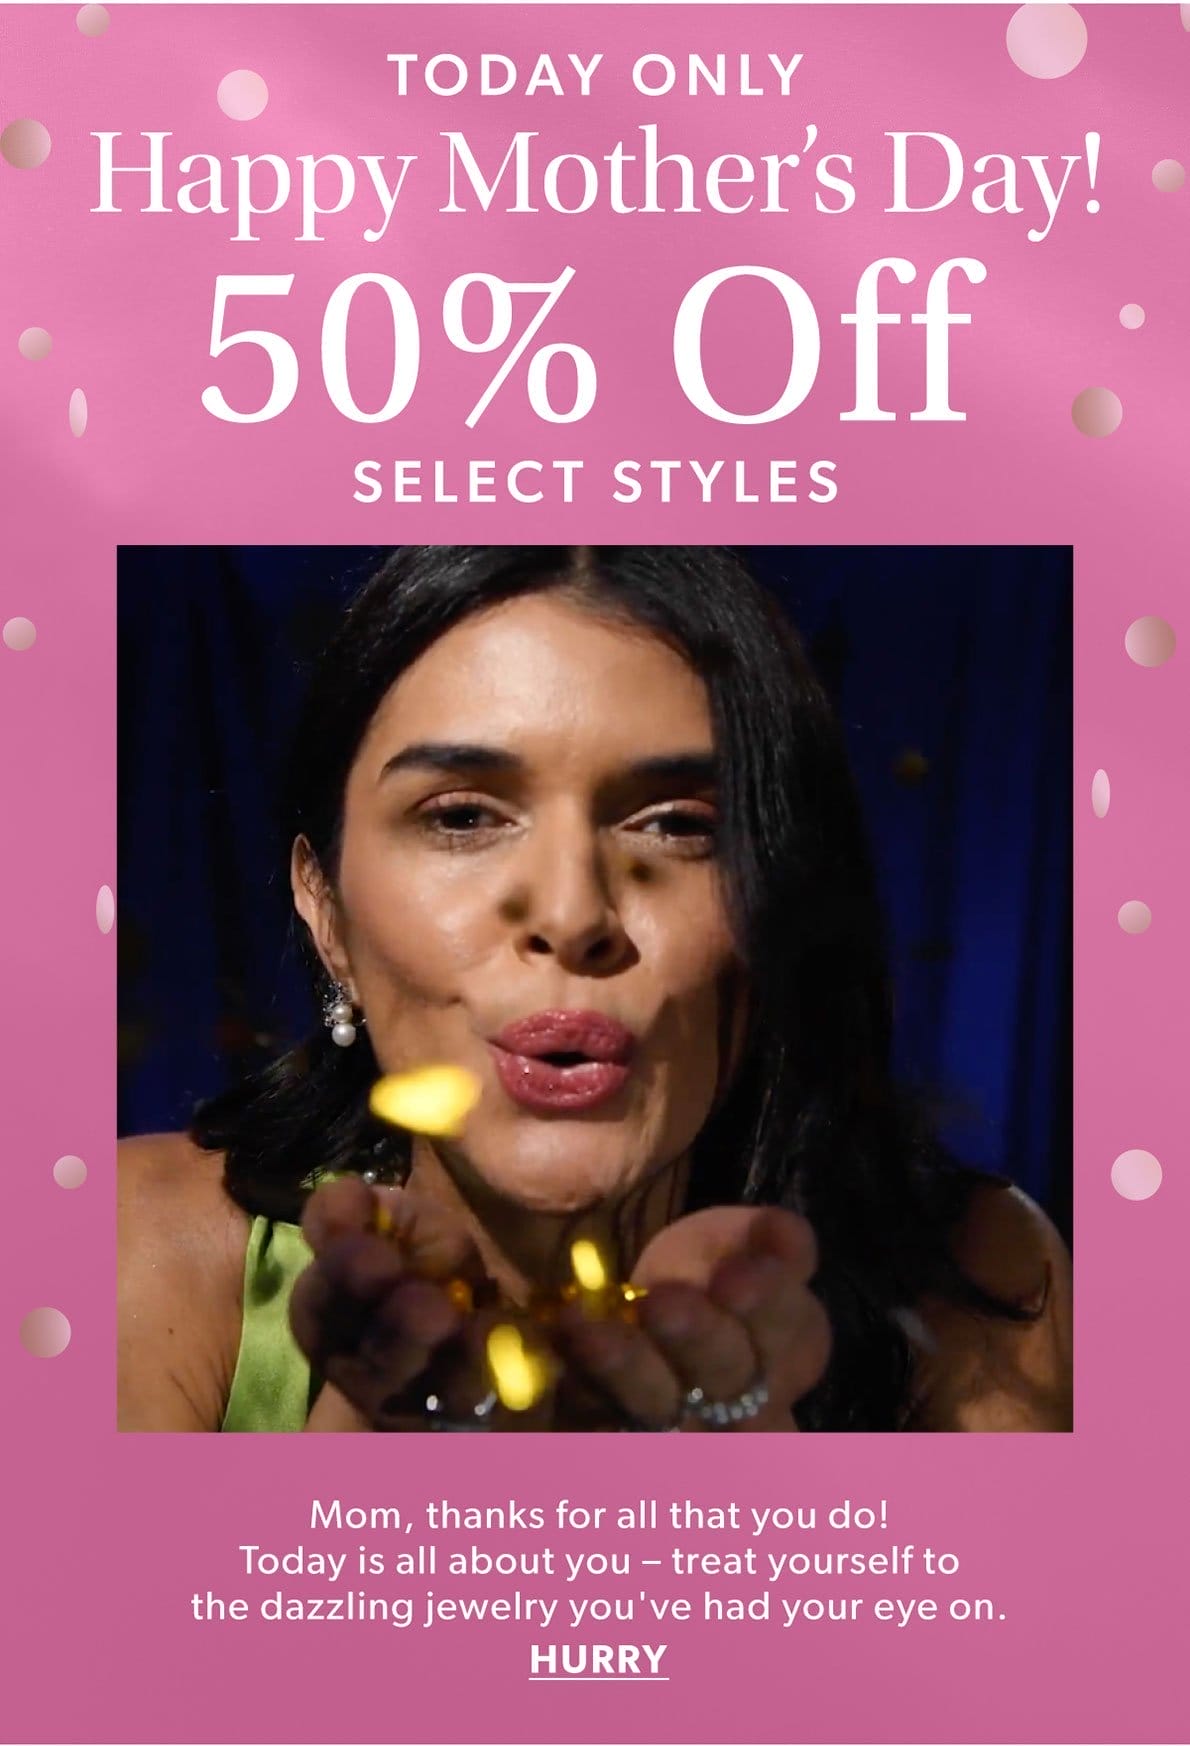 Today Only! Happy Mother's Day! 50% Off Select Styles. Hurry